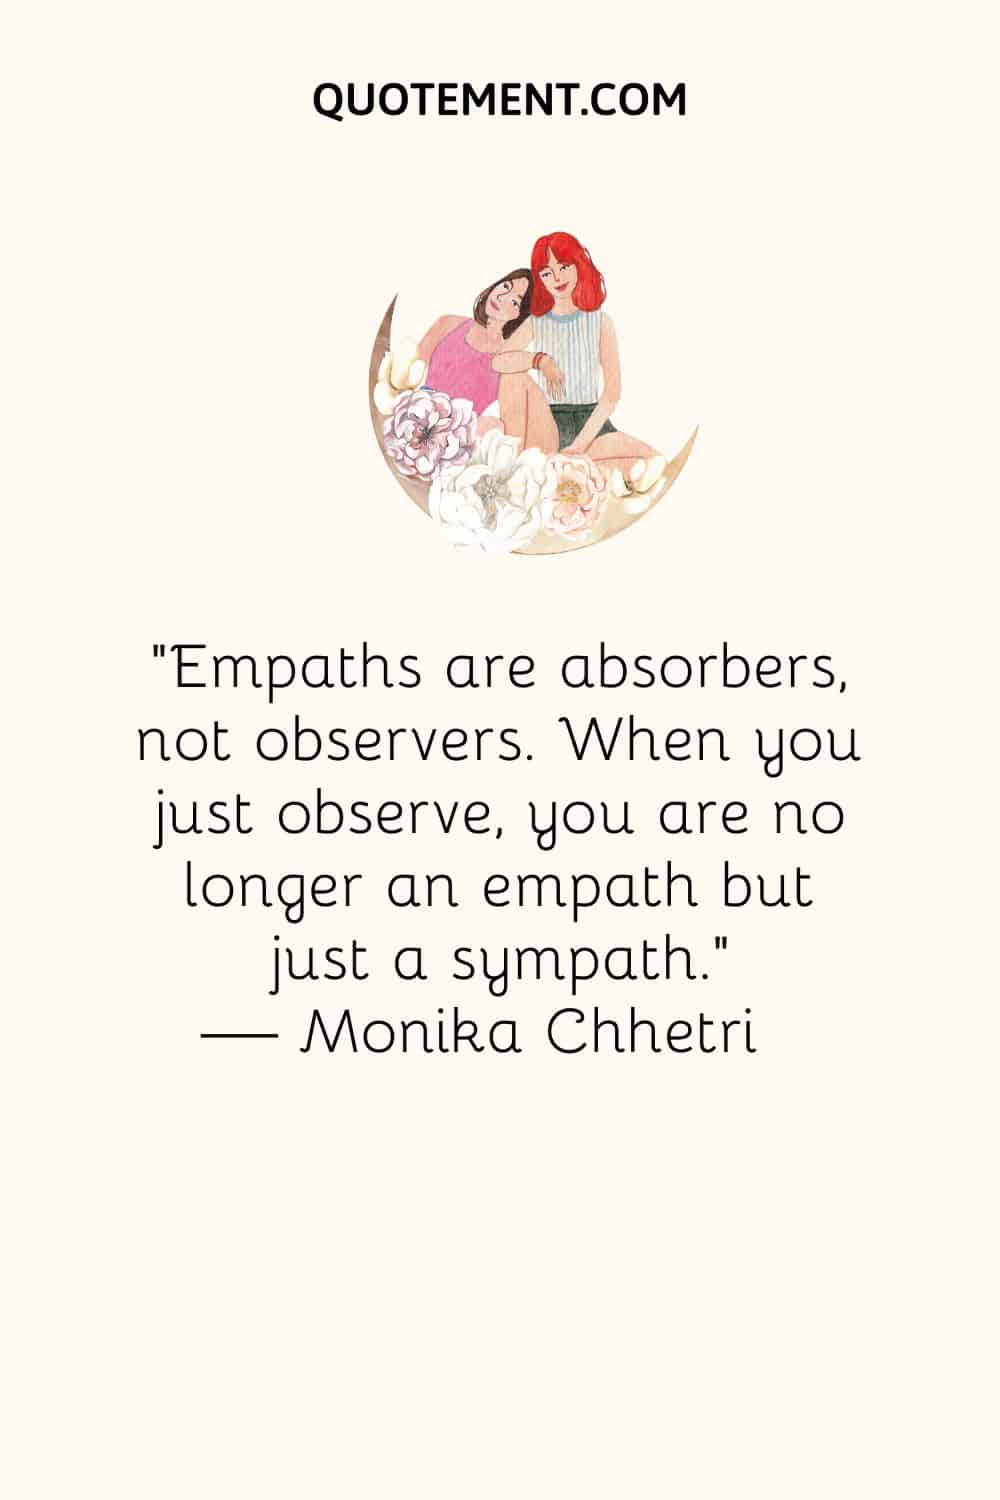 Empaths are absorbers, not observers. When you just observe, you are no longer an empath but just a sympath.